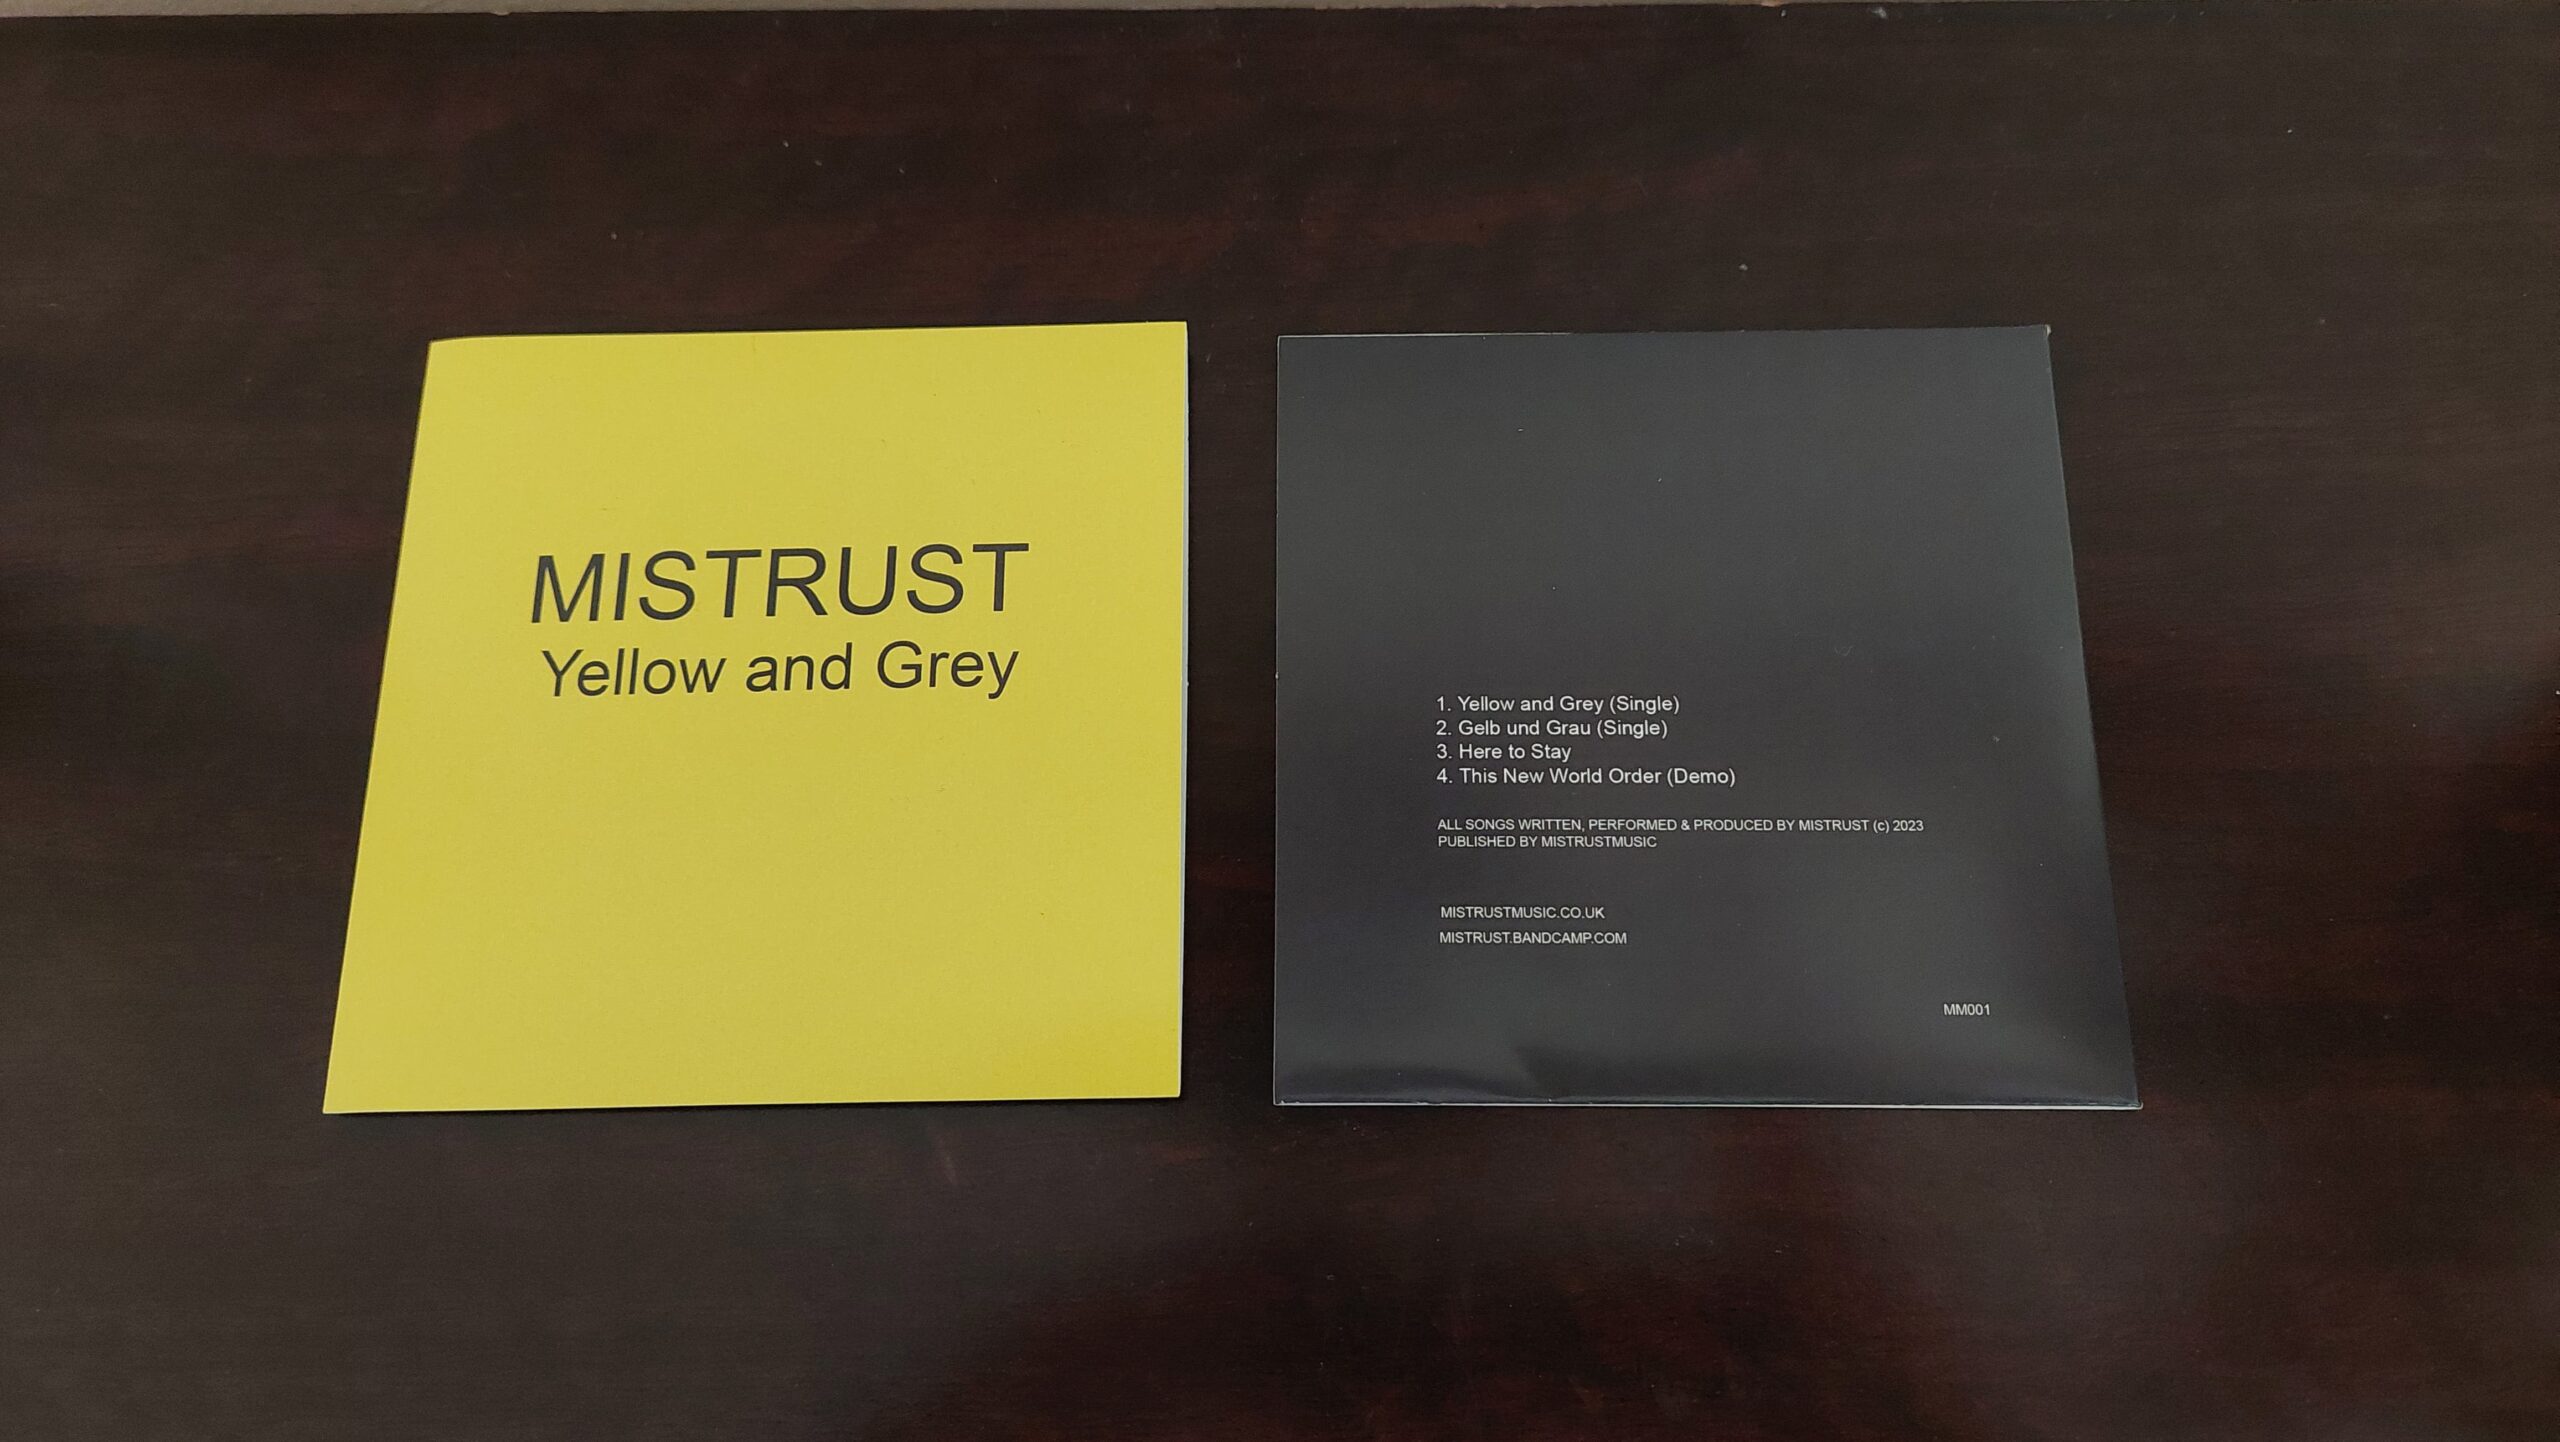 Yellow and Grey Limited Edition CD Out Today!